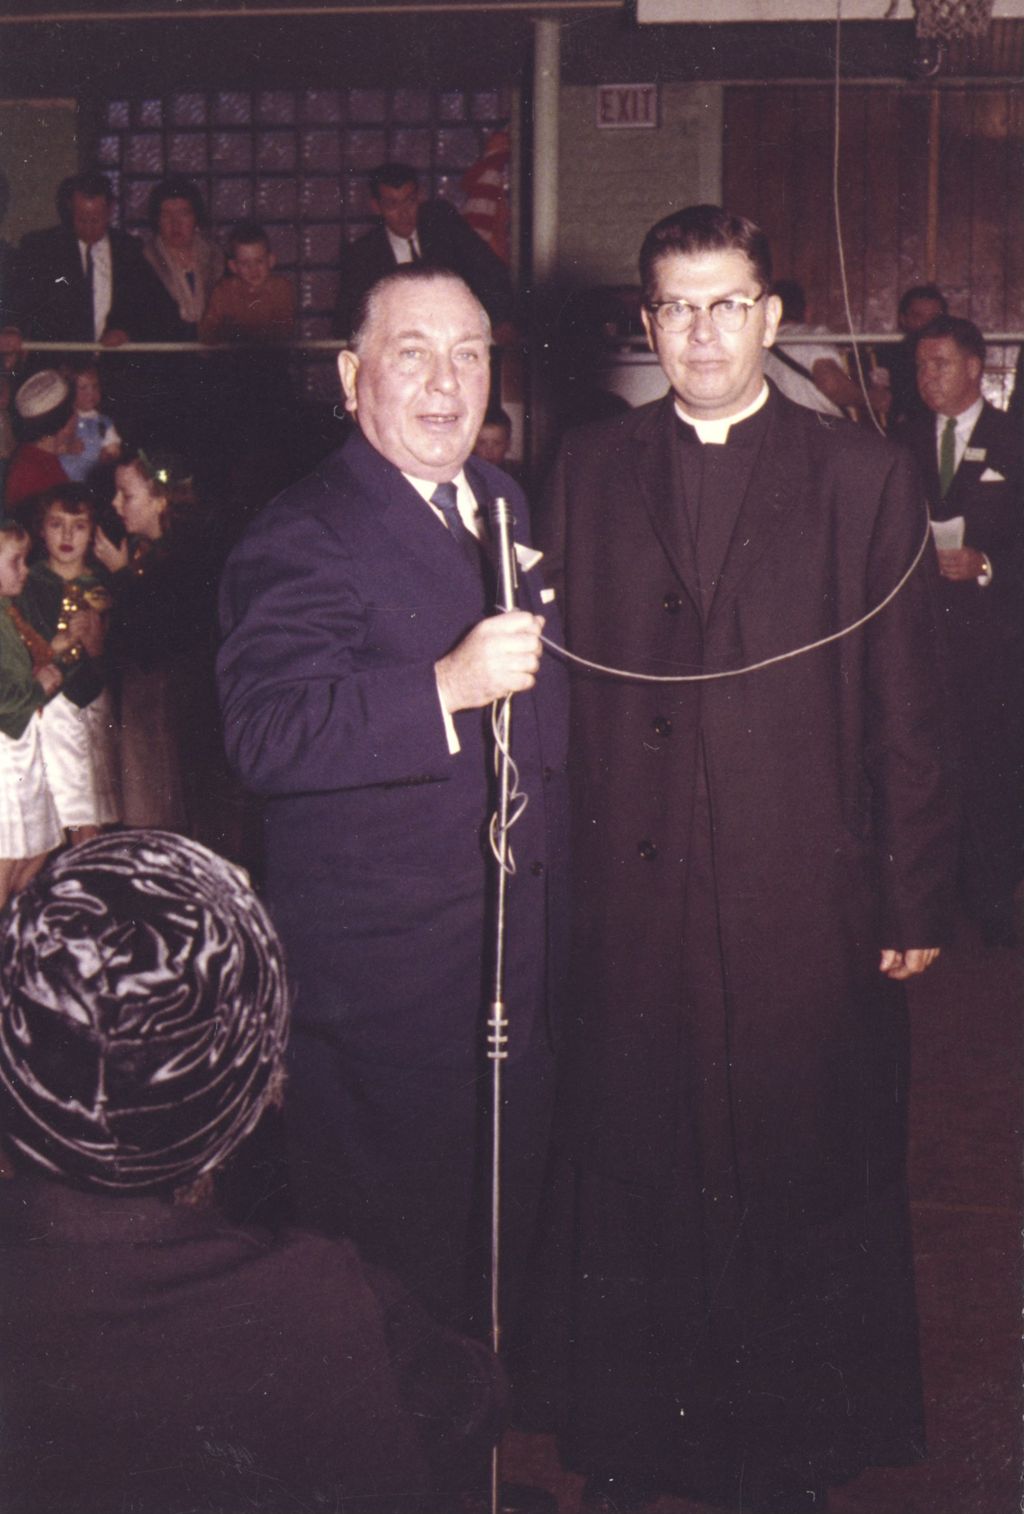 Richard J. Daley at a microphone with a priest